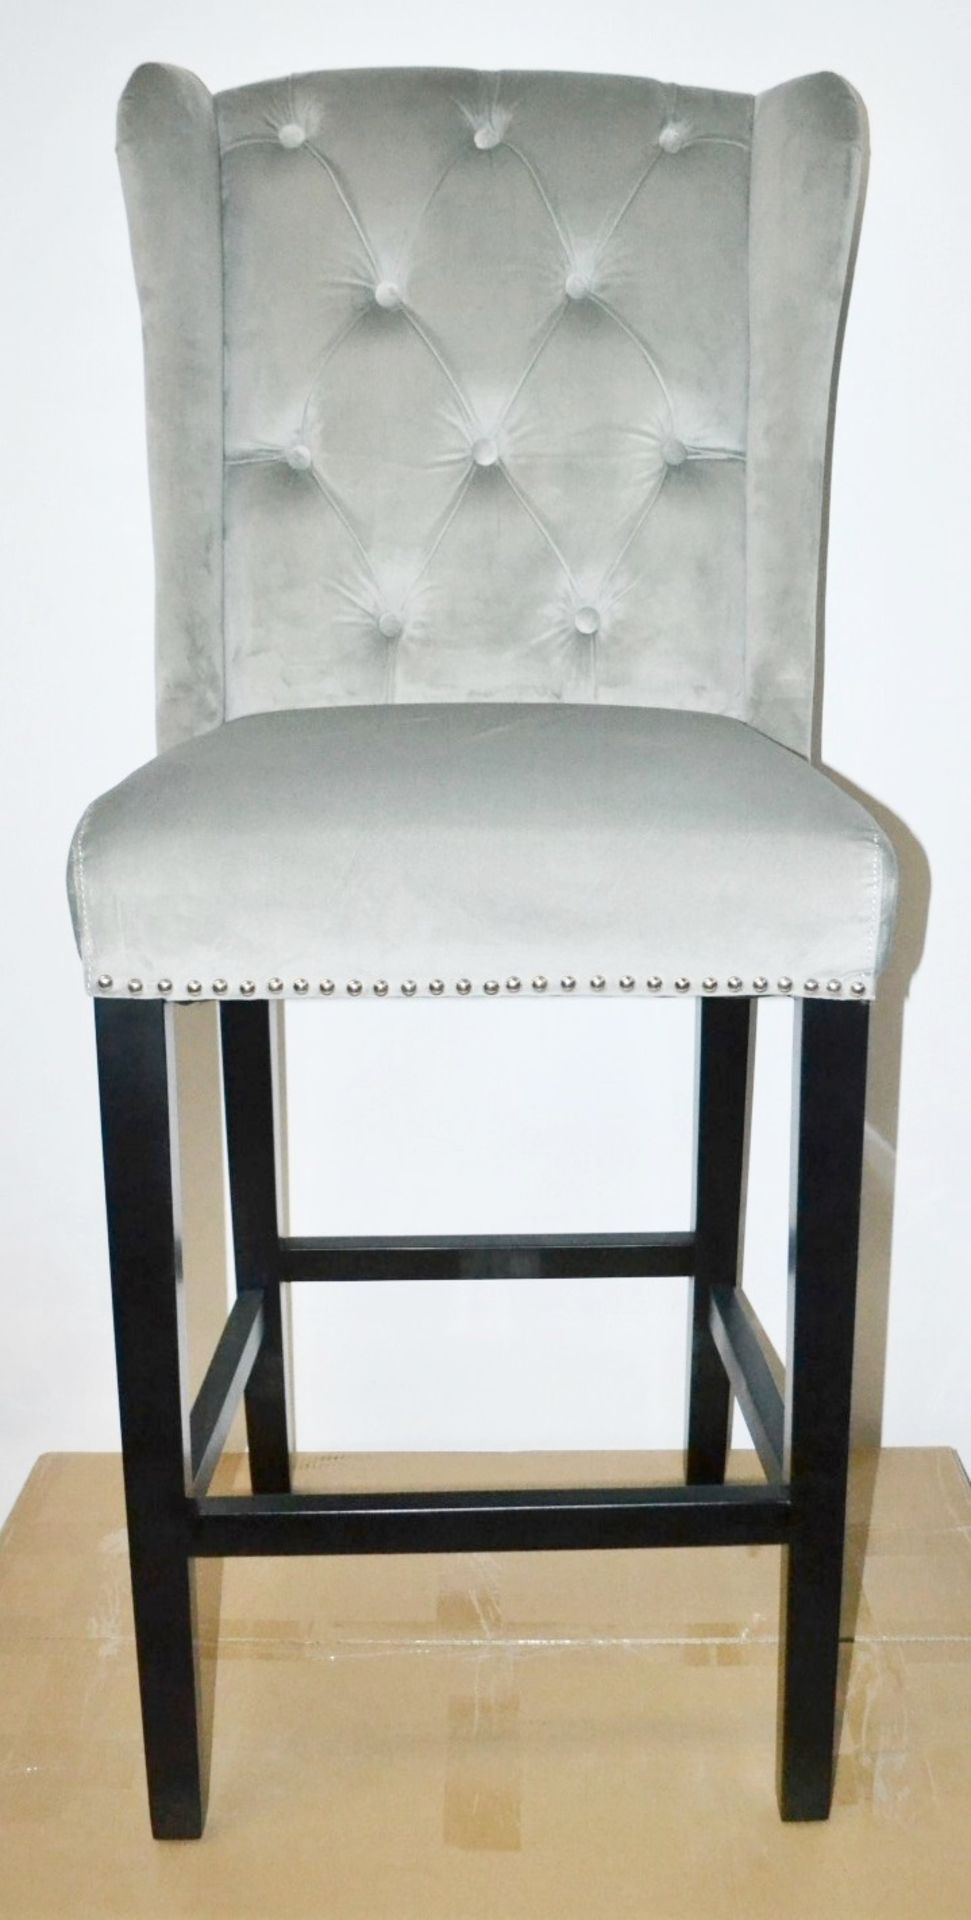 3 x HOUSE OF SPARKLES Luxury Wing Back Bar Stools In A Silver Velvet With BLACK Legs - Image 2 of 8